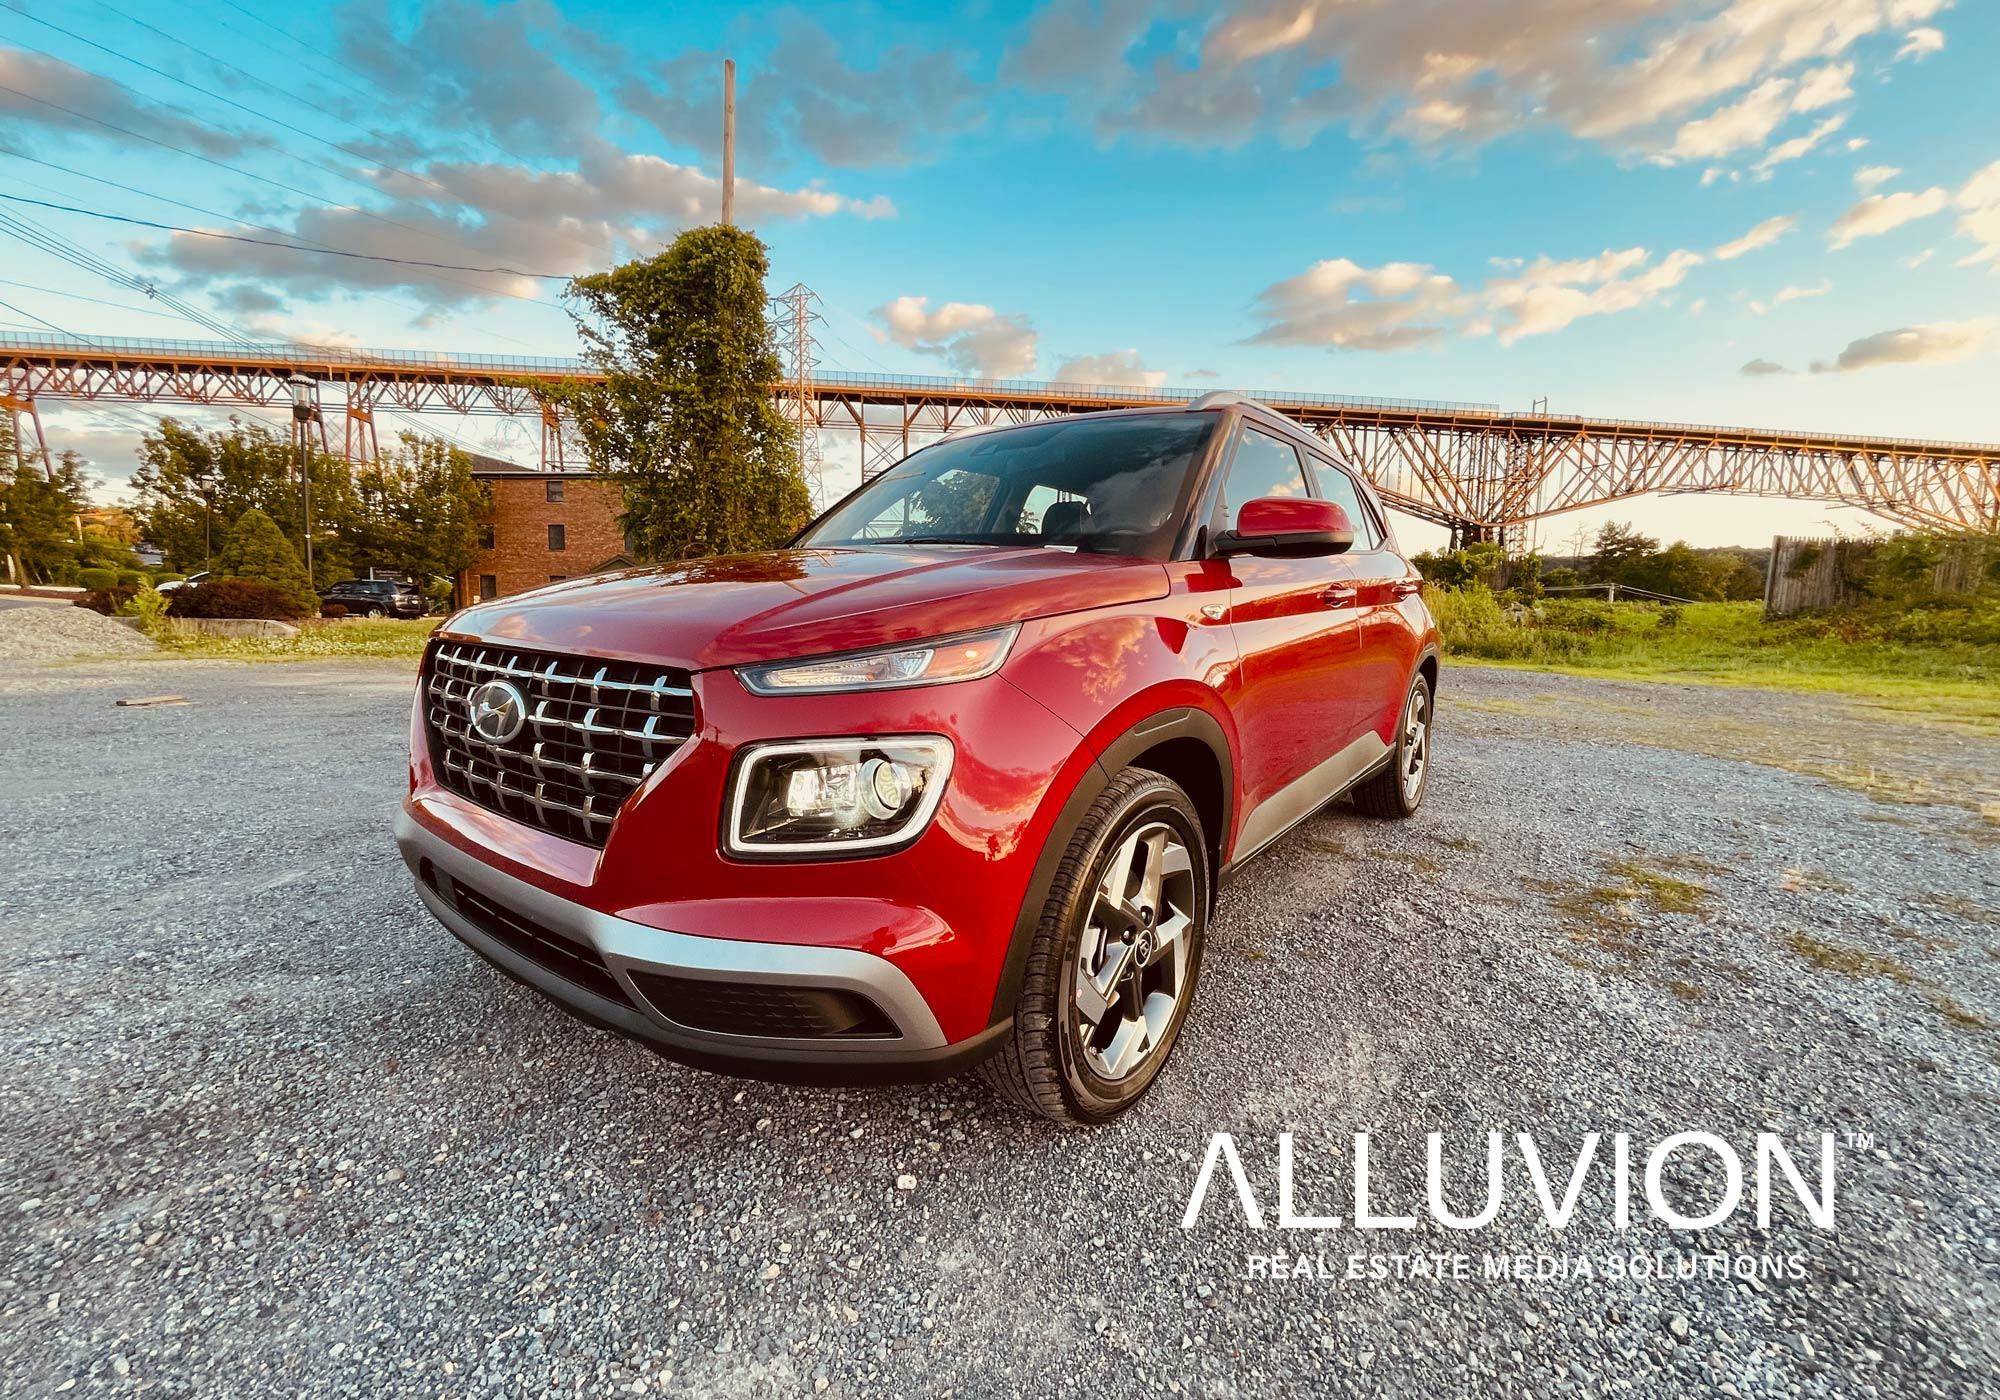 Turo Car Rental Platform Arrives in New York and the Hudson Valley to Save You Money on Your Next Trip – Turo Car Rental Photography by Alluvion Media